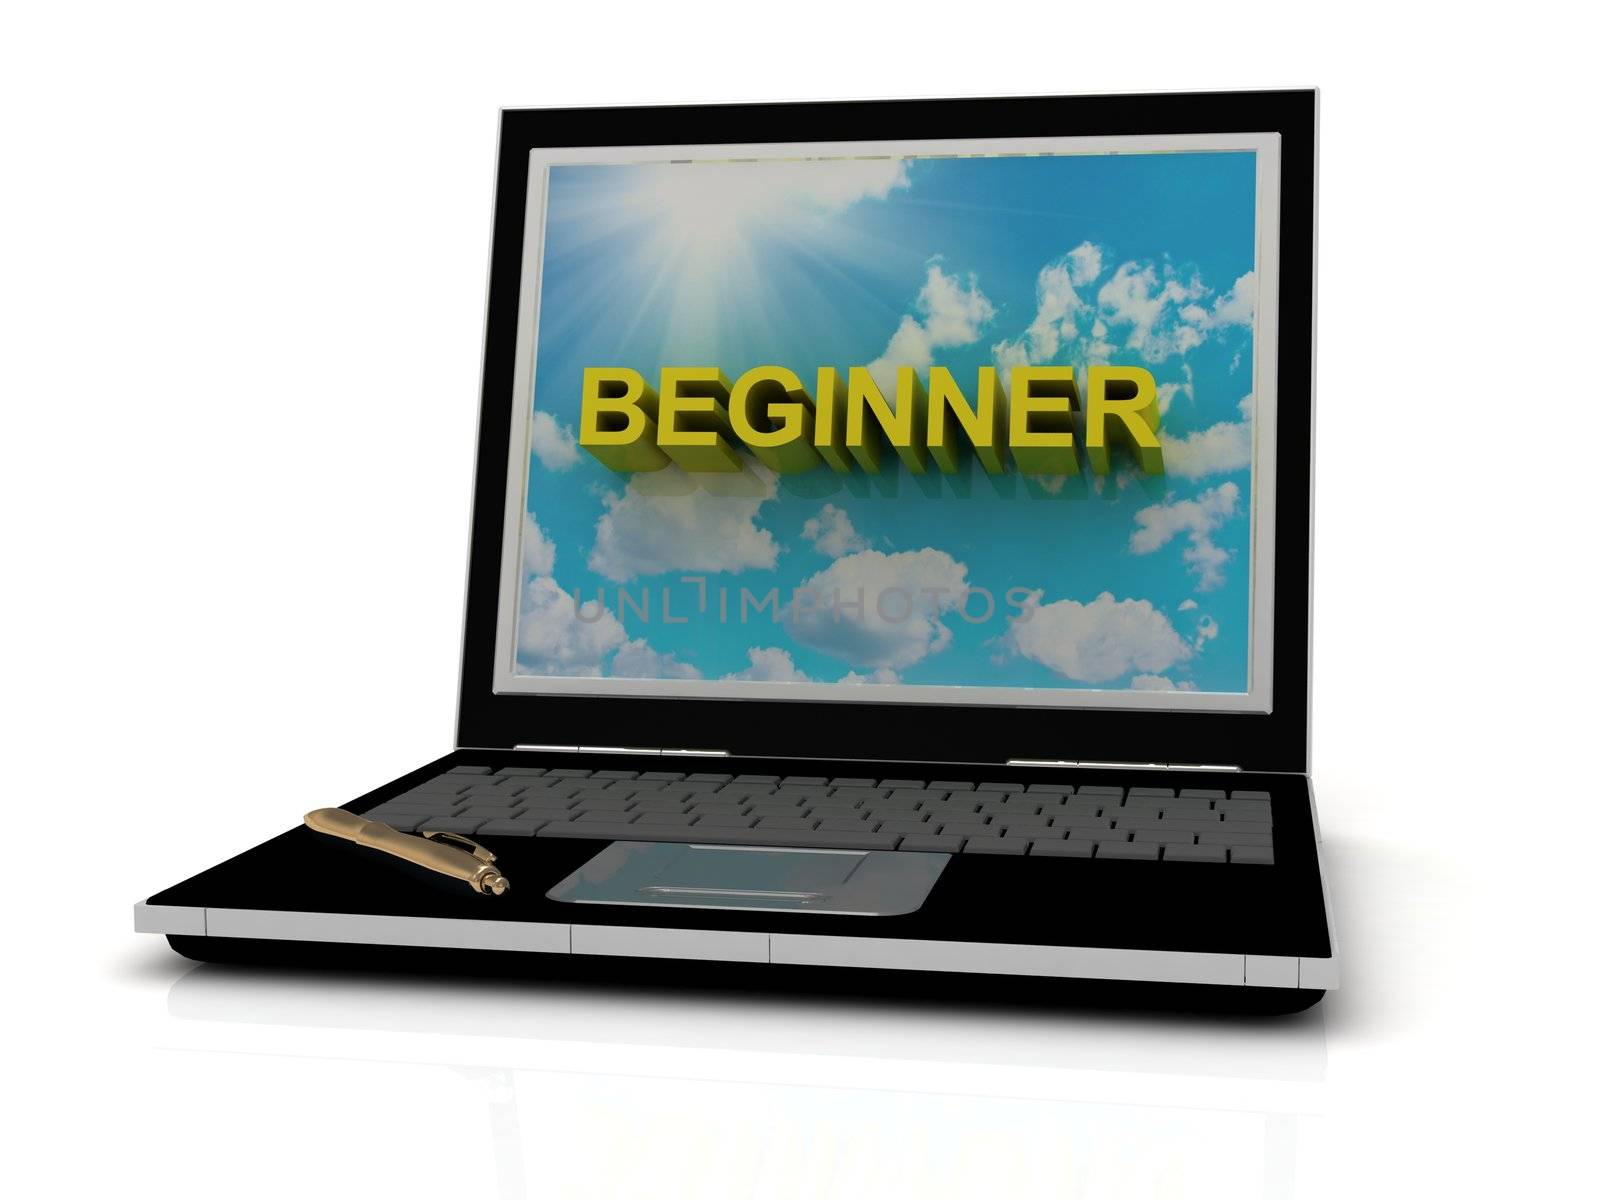 BEGINNER sign on laptop screen of the yellow letters on a background of sky, sun and clouds